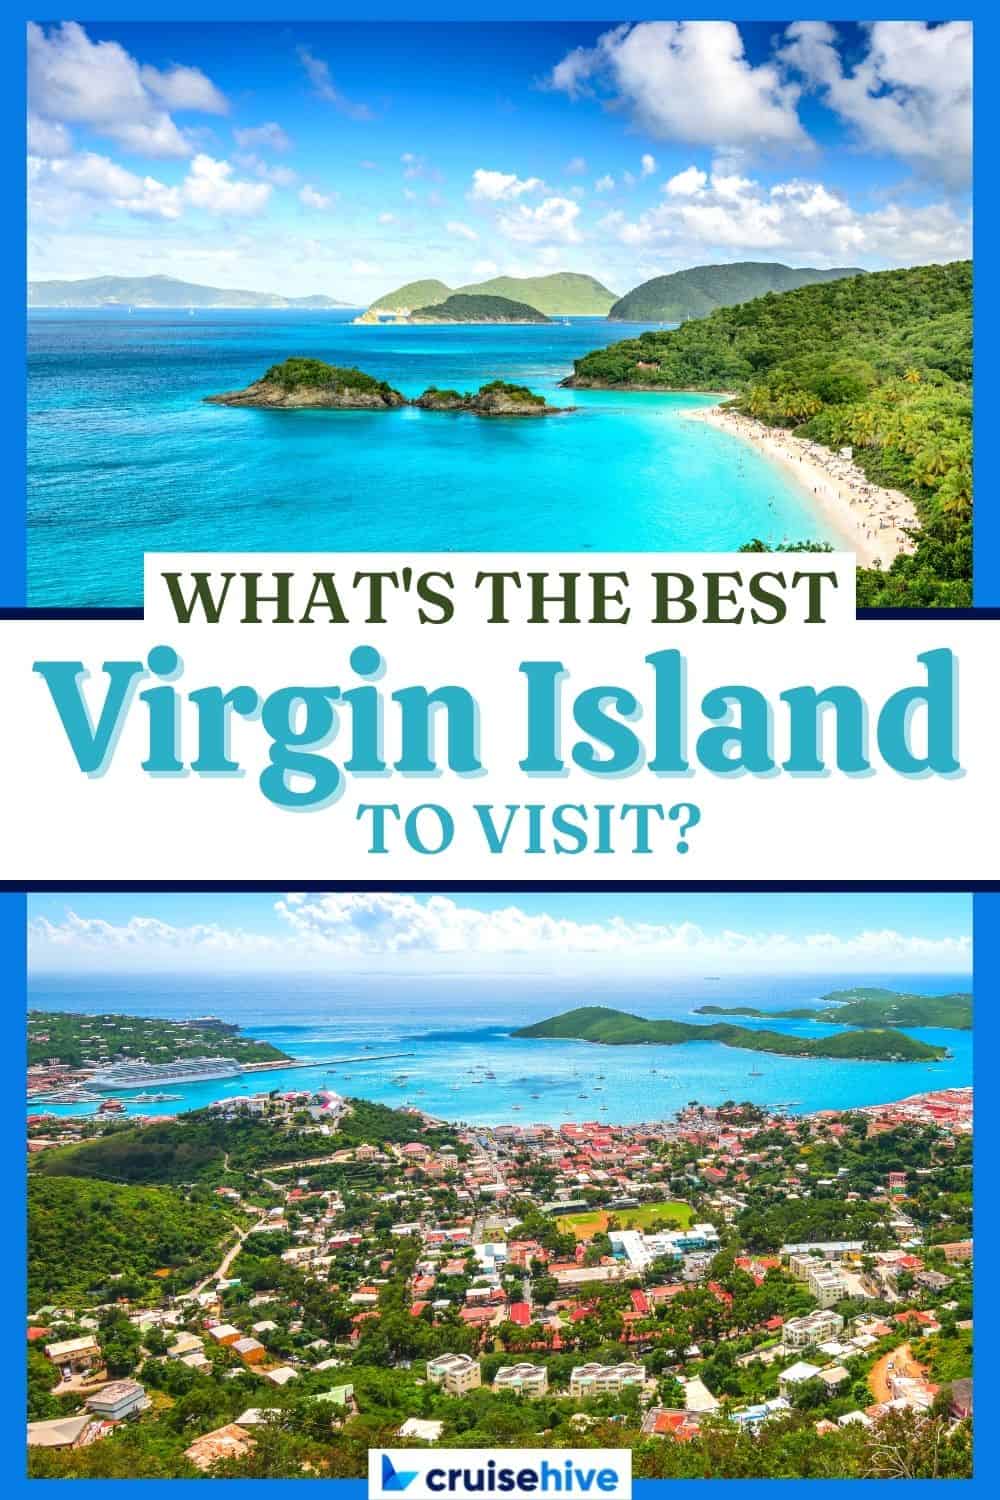 What’s the Best Virgin Island to Visit